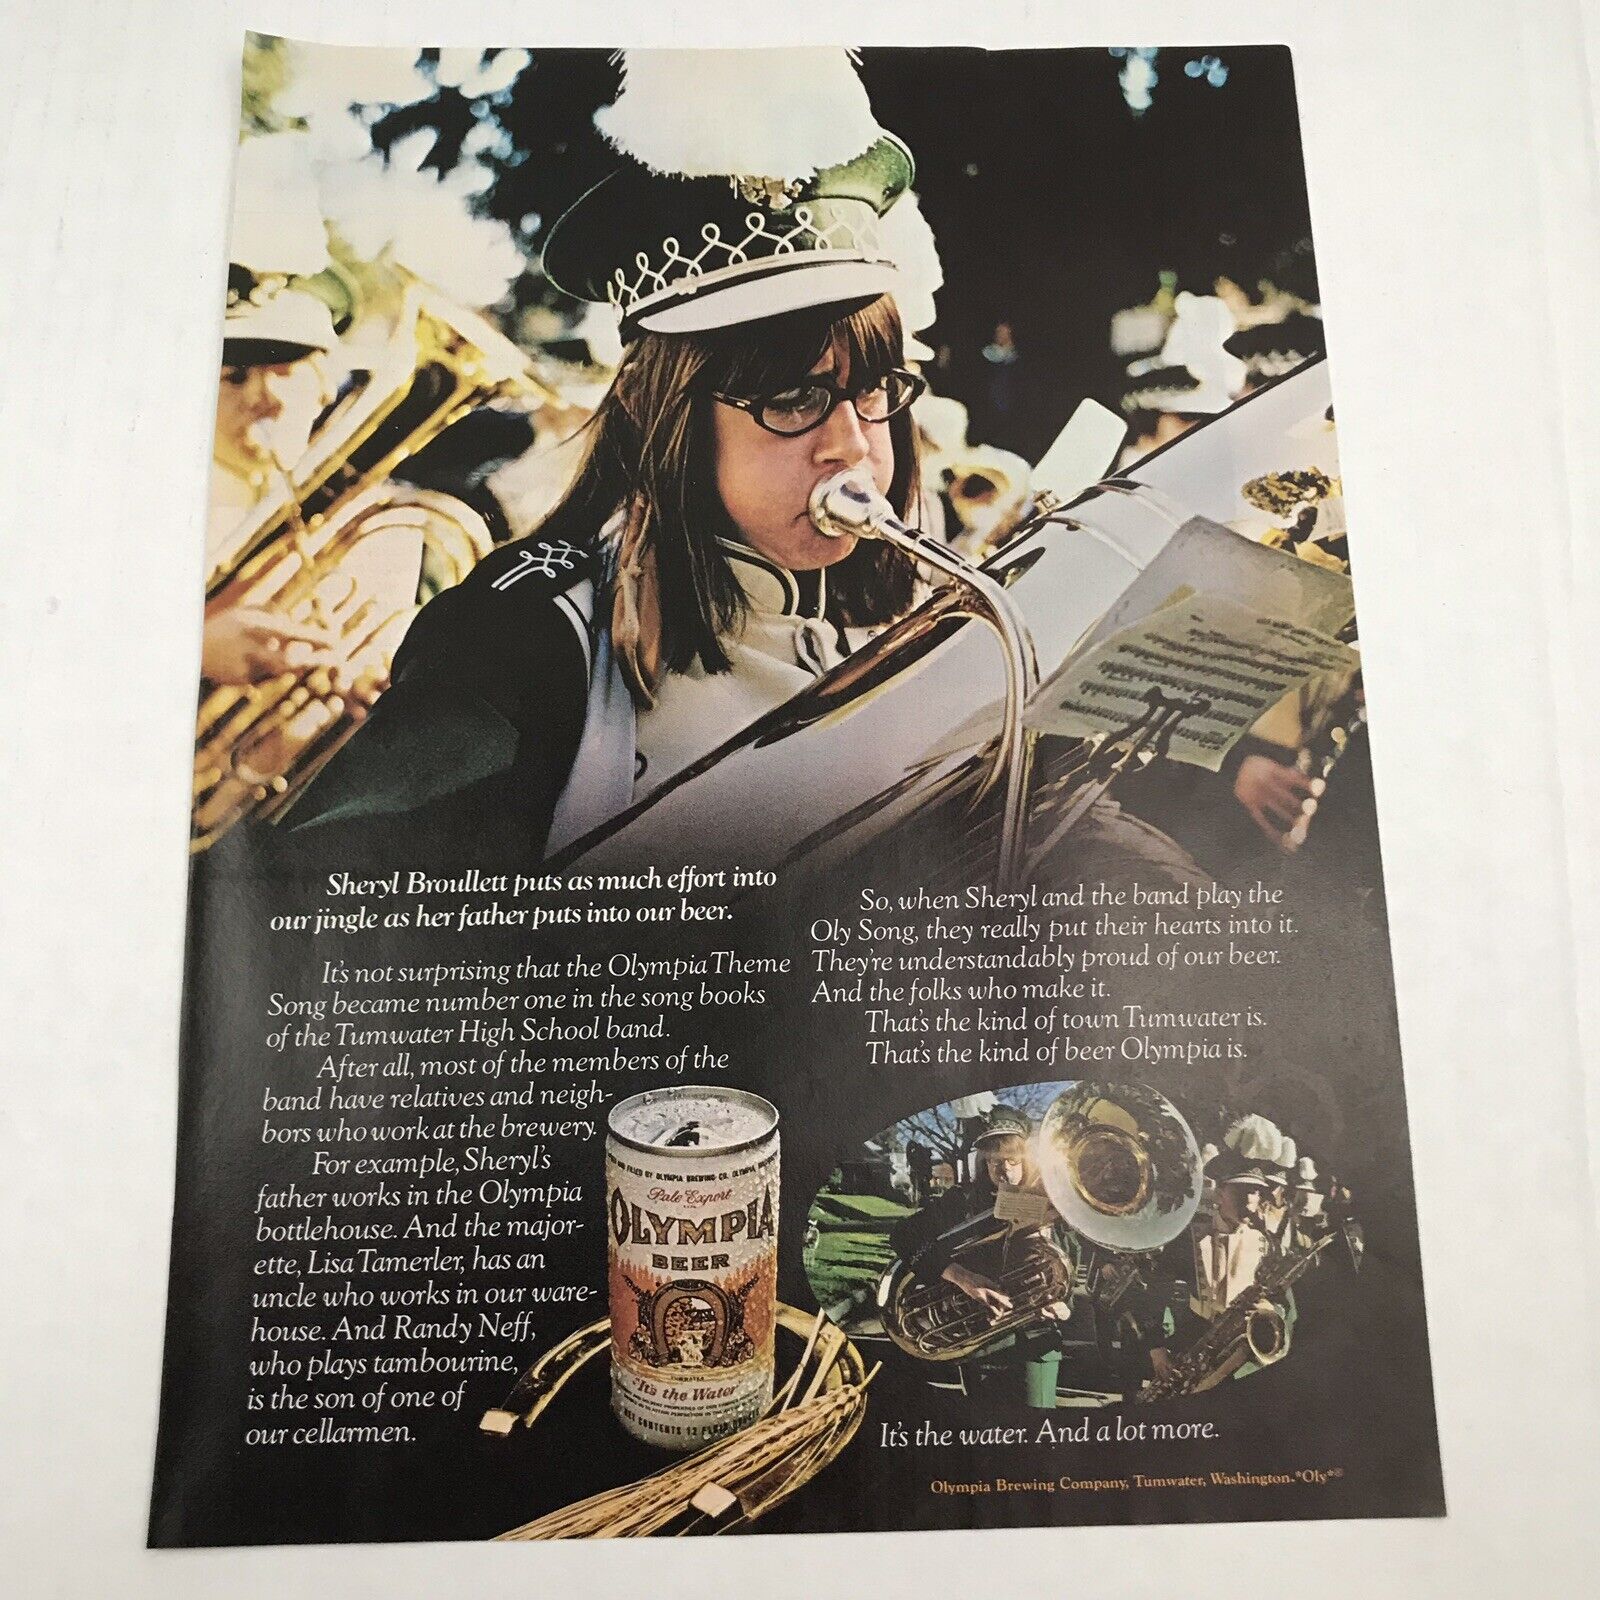 Vtg 1973 Print Ad Olympia Beer Its The Water Tuba Player Band Advertising Art 